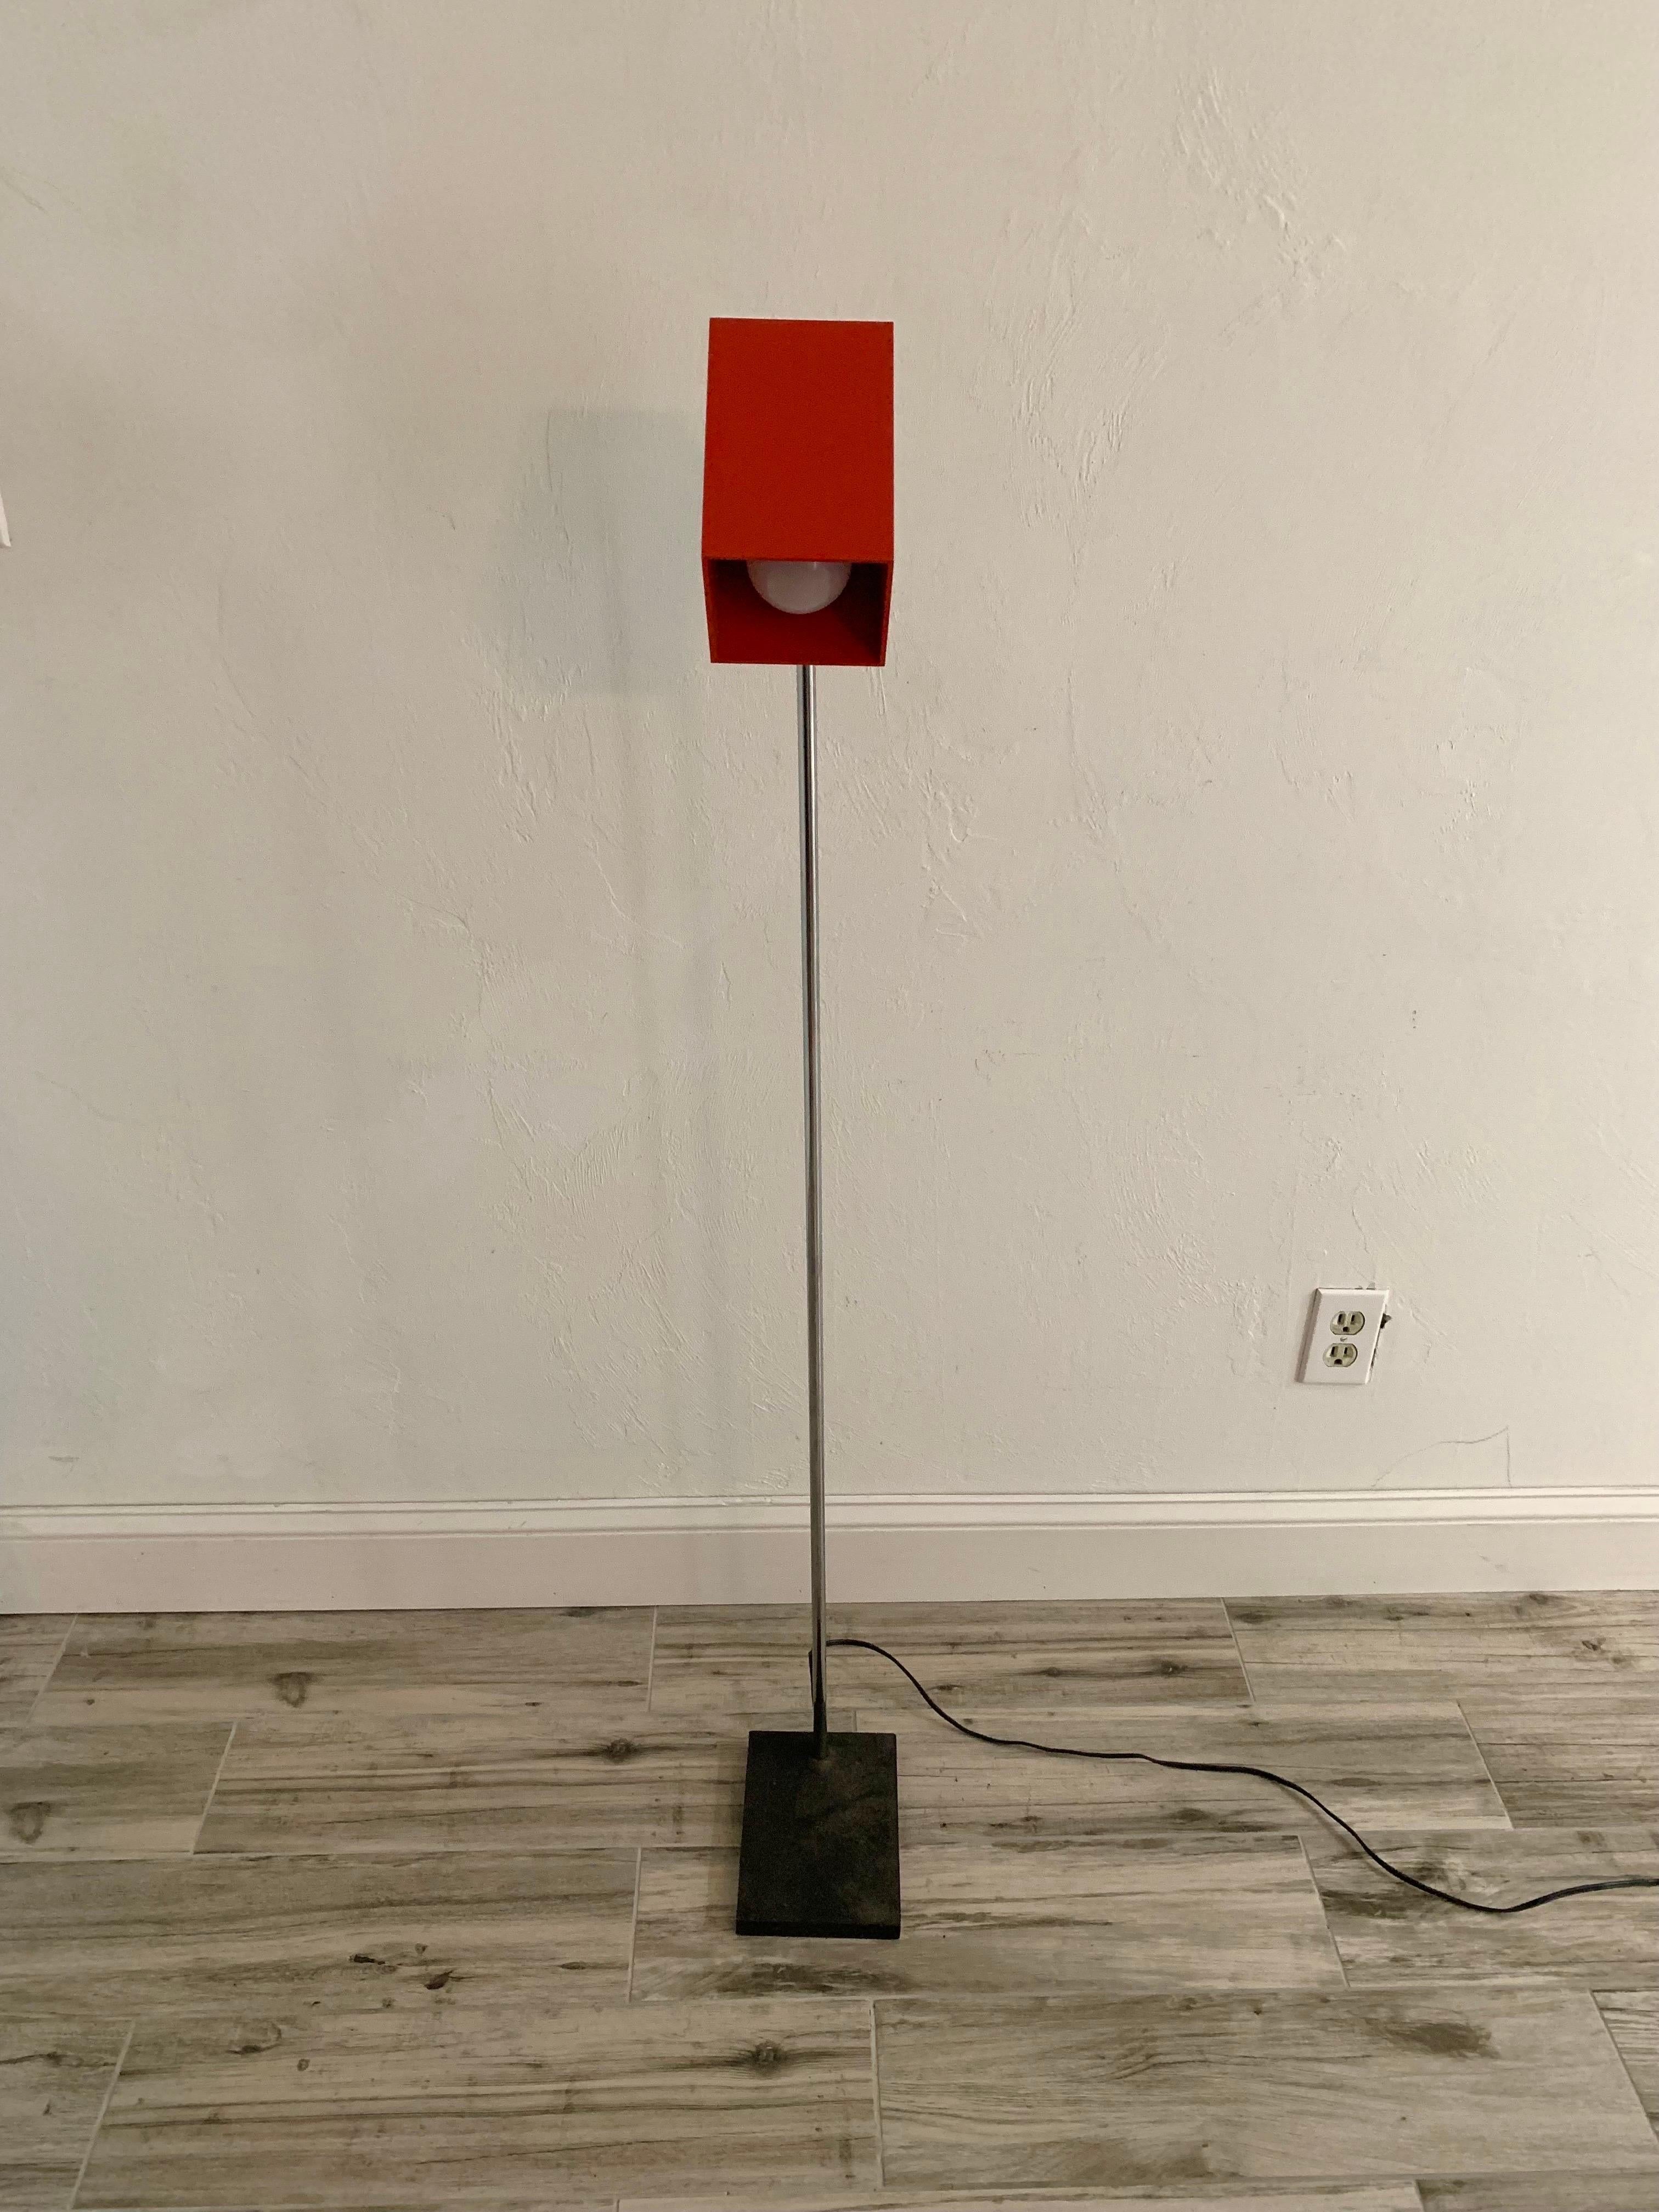 Mid Century Modern cubist floor lamp. Designed by Robert Sonneman for George Kovacs. Designed and produced in the 1950s. Base is made out of either solid iron or steel. Has a long chrome neck and a red steel cubist block shade. 

Lamp is in great